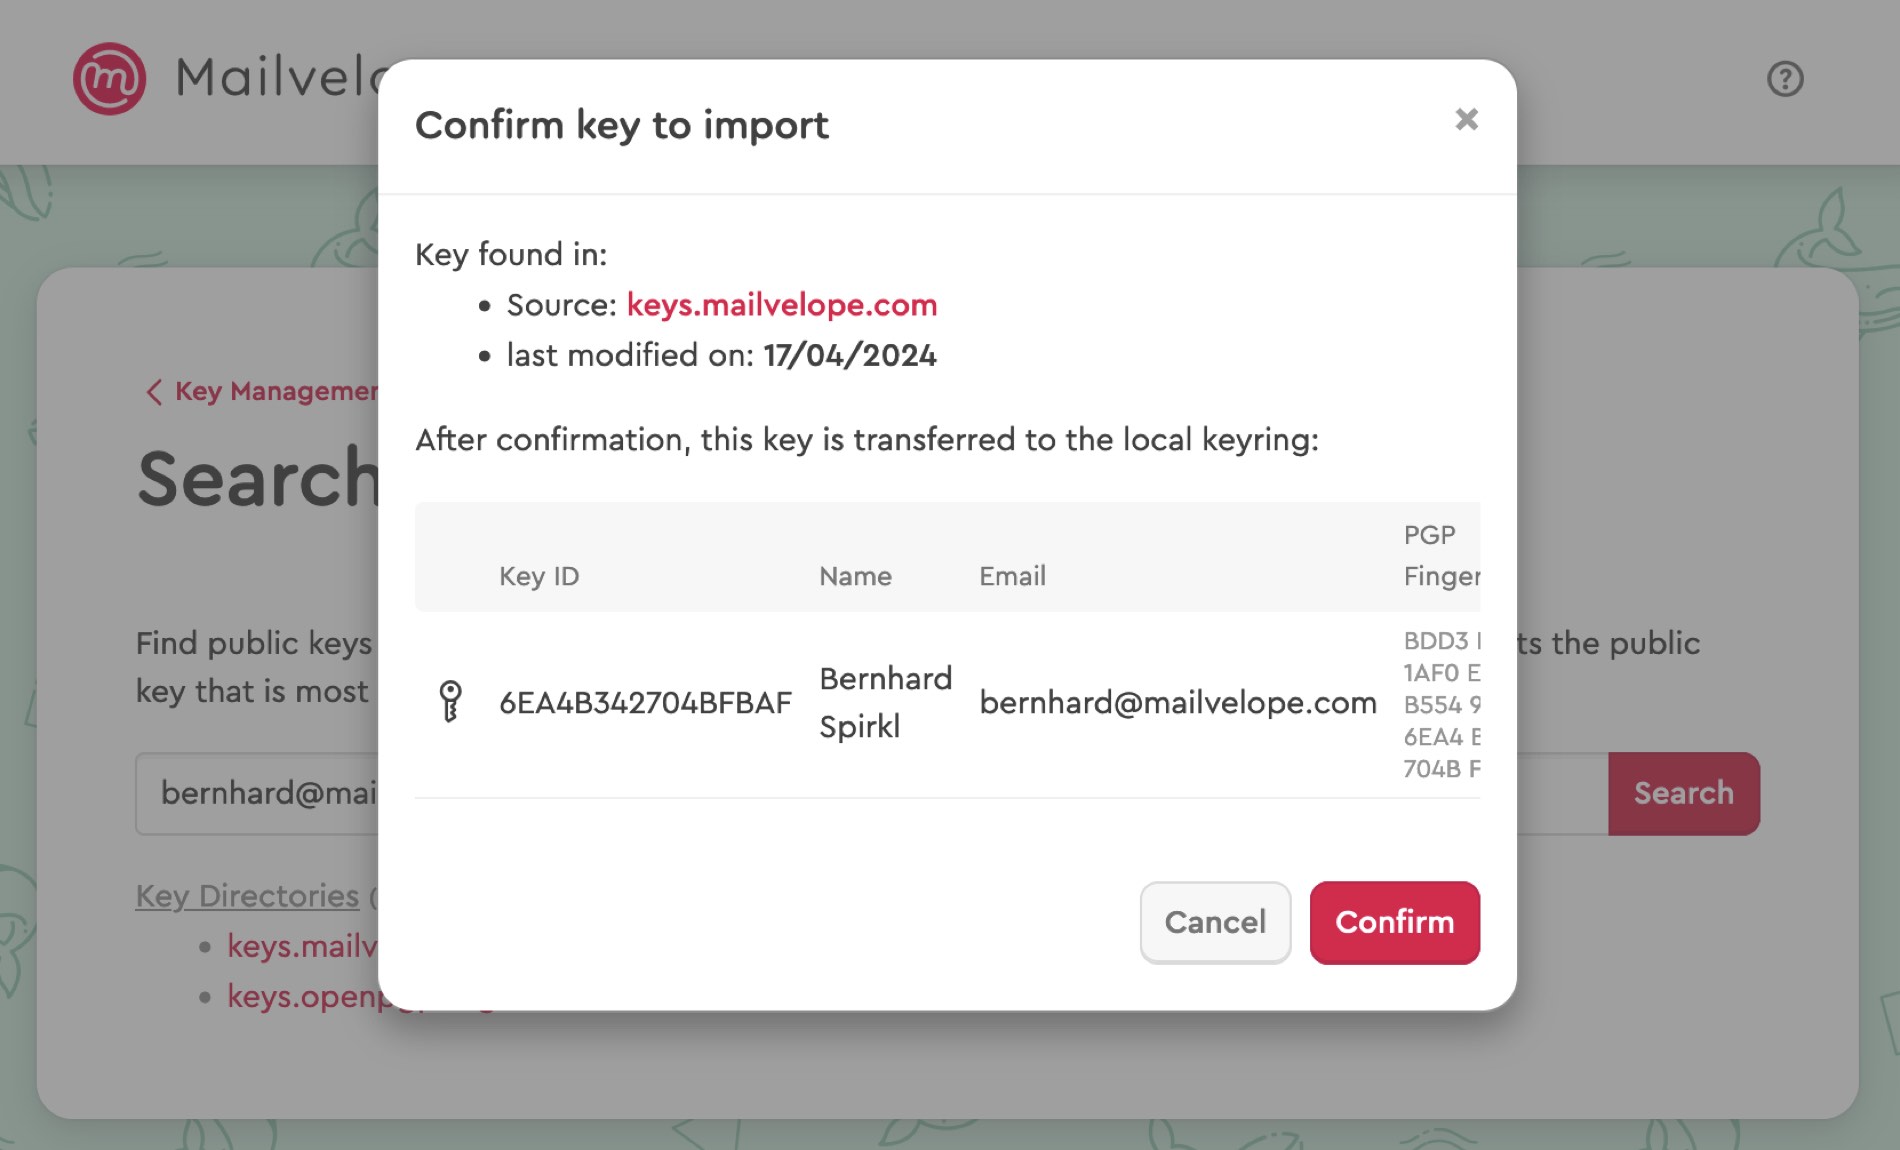 Mailvelope asks for confirmation to import a found key